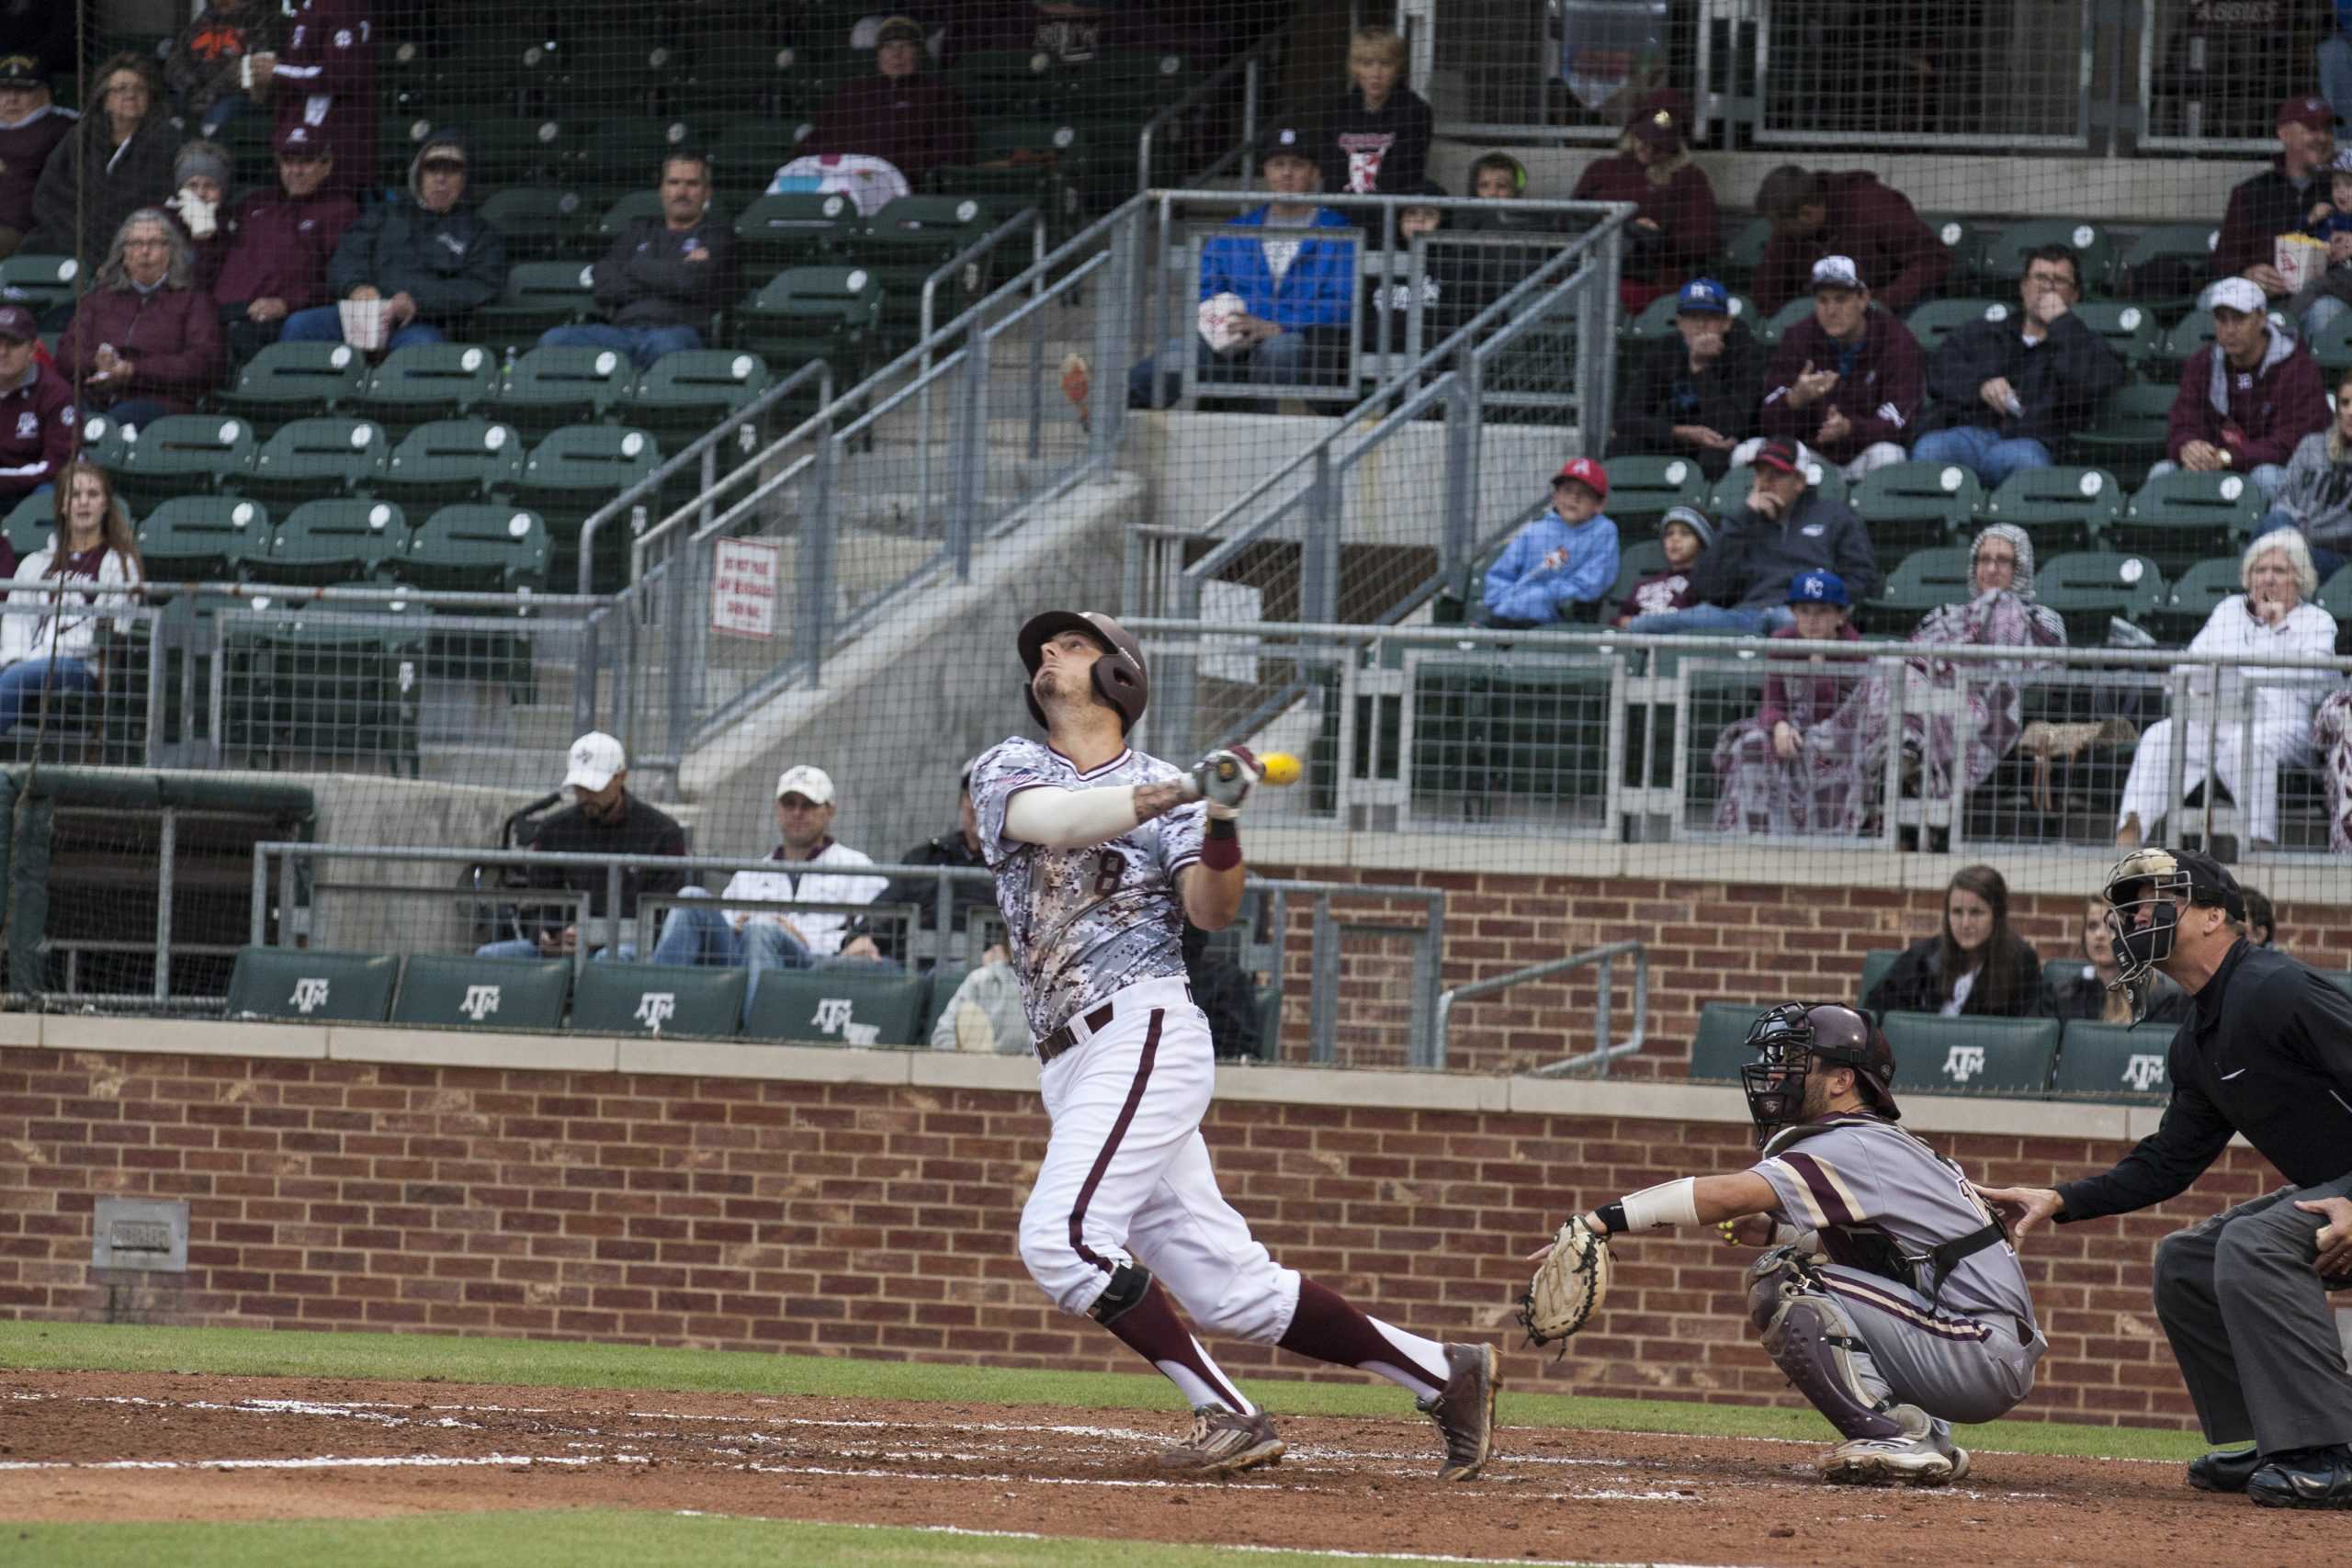 Nottebrok+helps+Aggies+land+on+their+feet+with+walk-off+hit+in+11th+inning